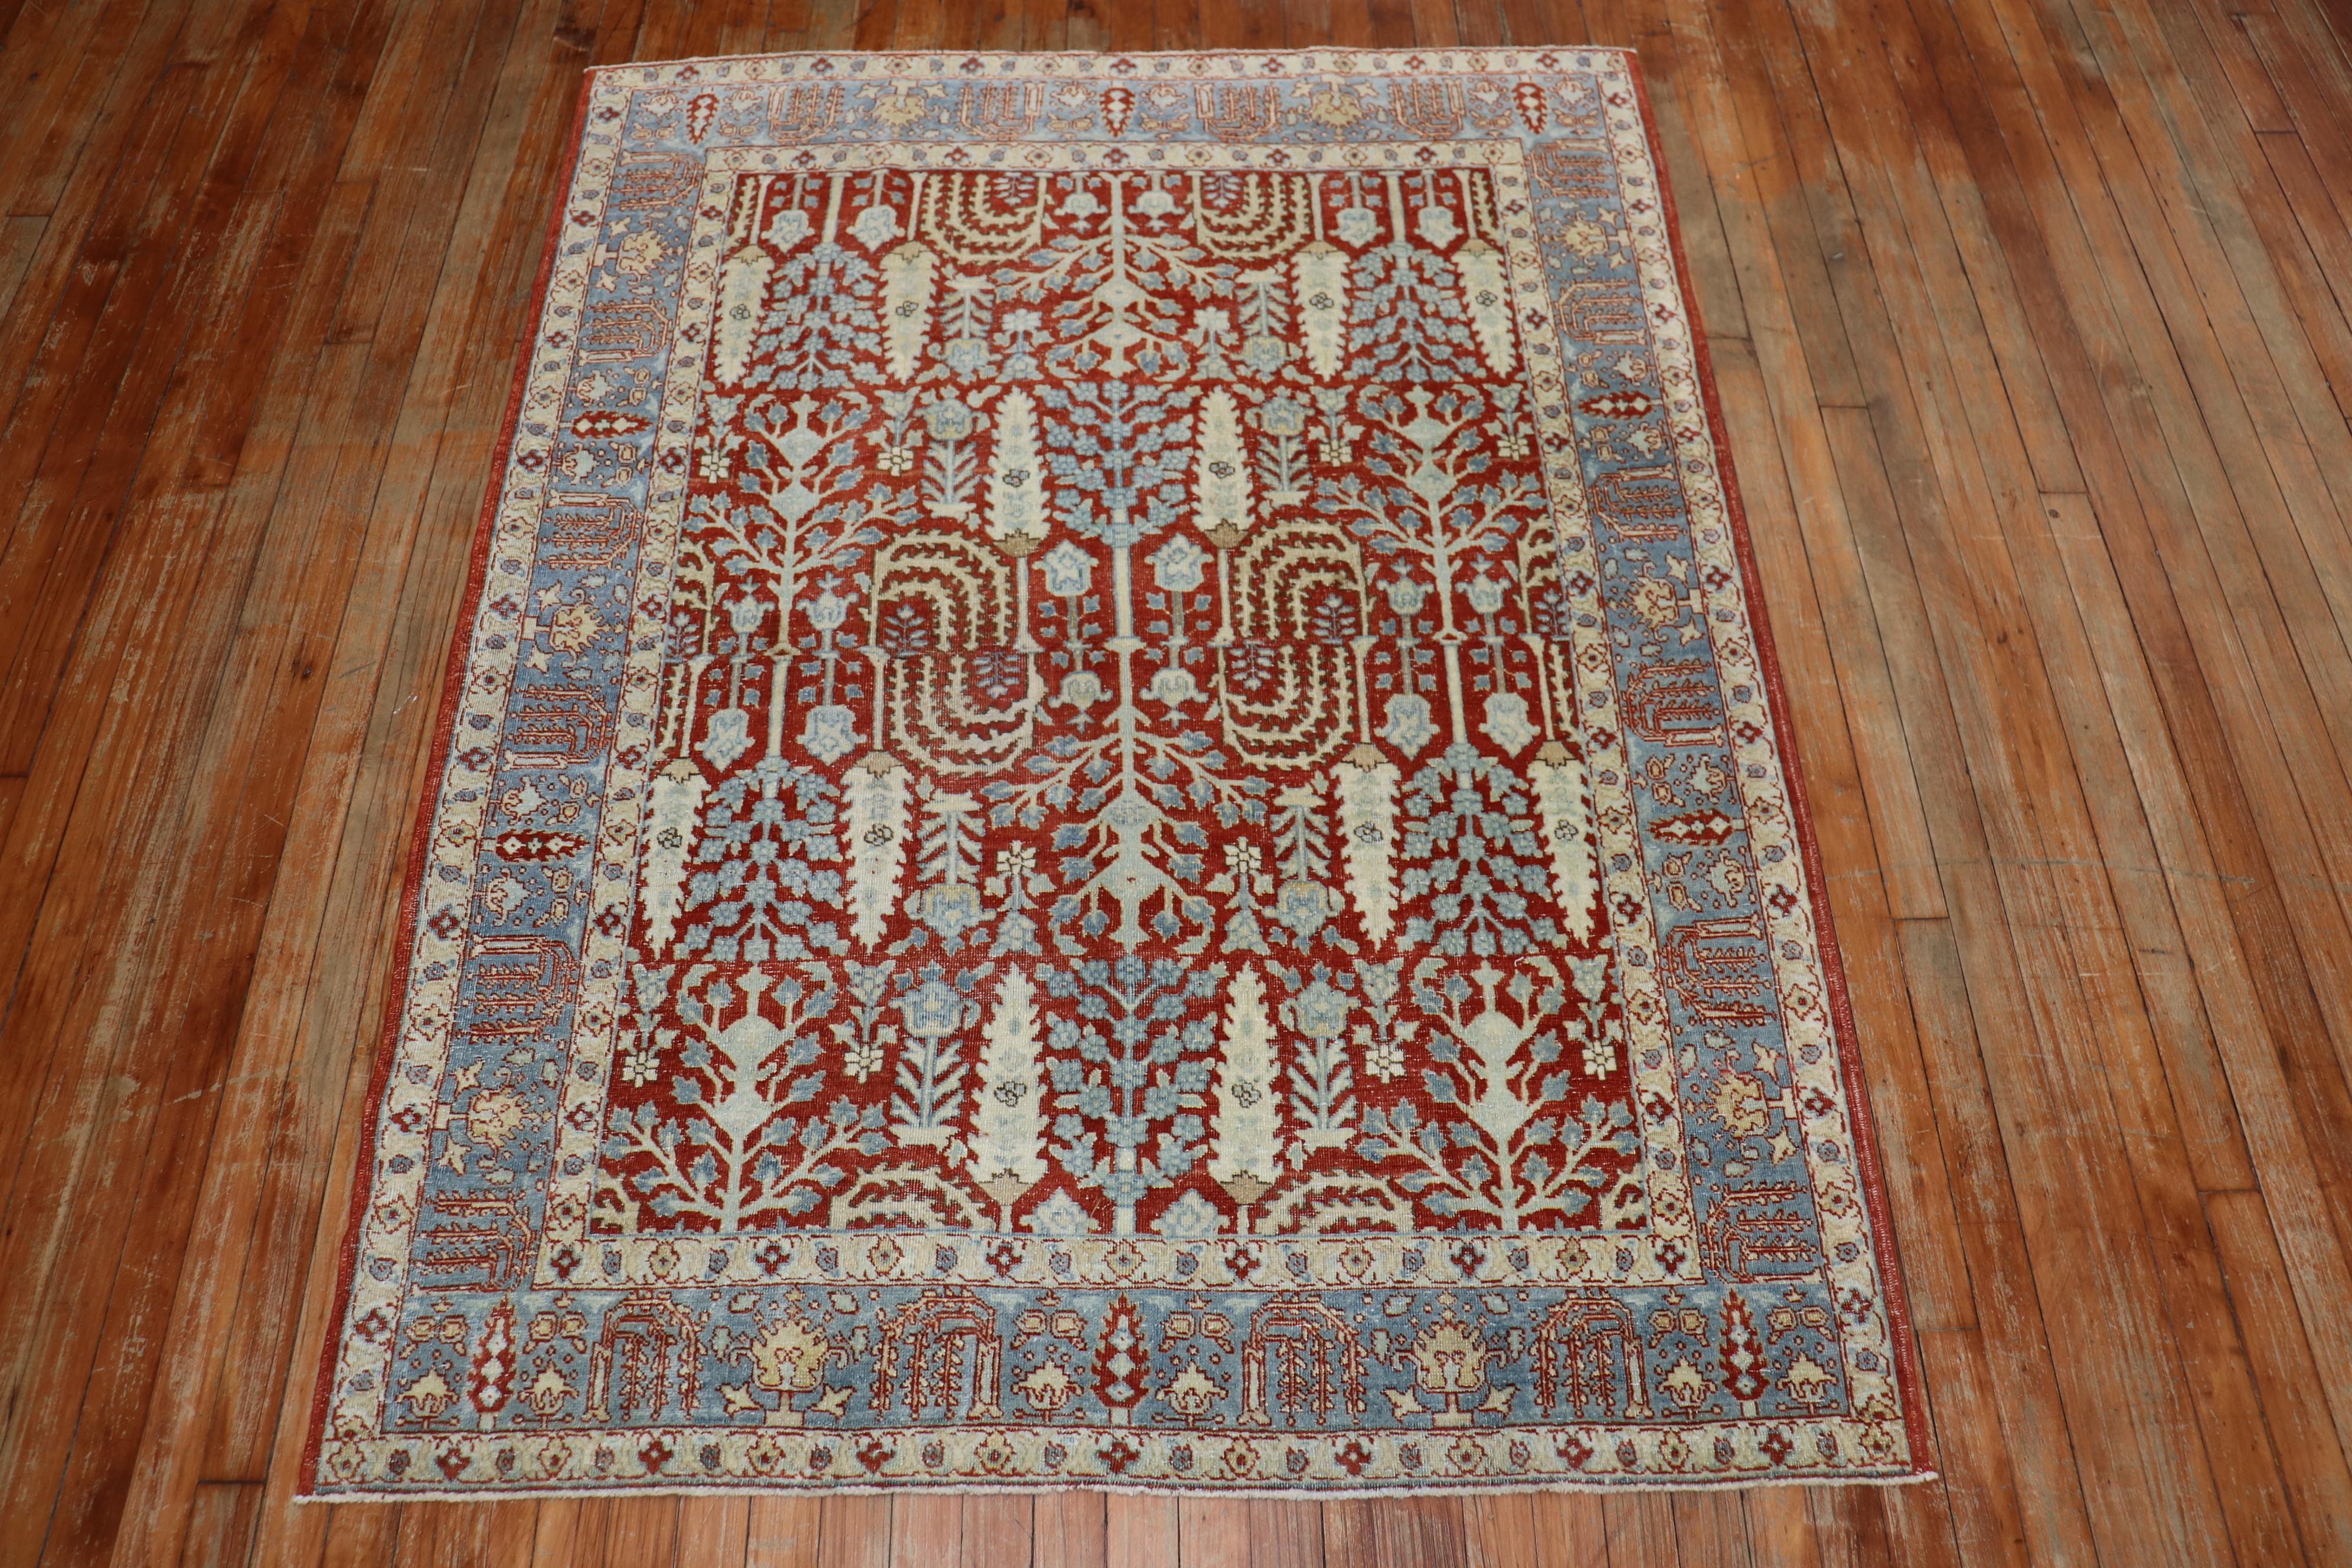 Garden of Paradise Motif mid-20th century Persian Tabriz rug with a deep red field, accents in ivory and icy blue

Measures: 4'6